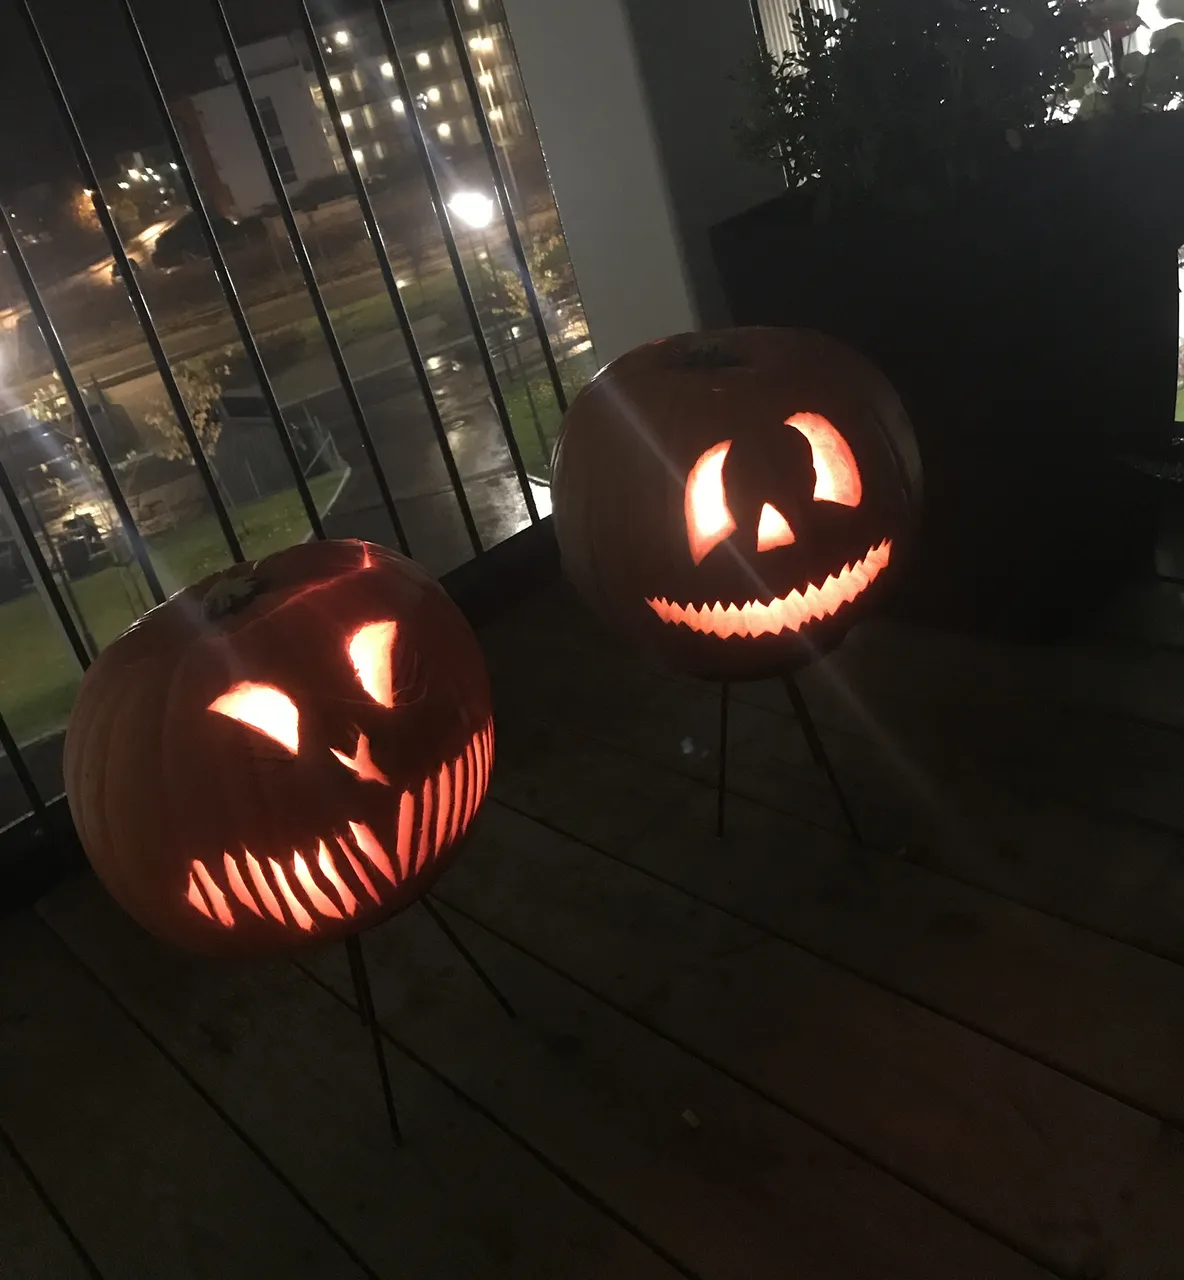 The results! @pusen´s pumpkin on the left and mine on the right side.